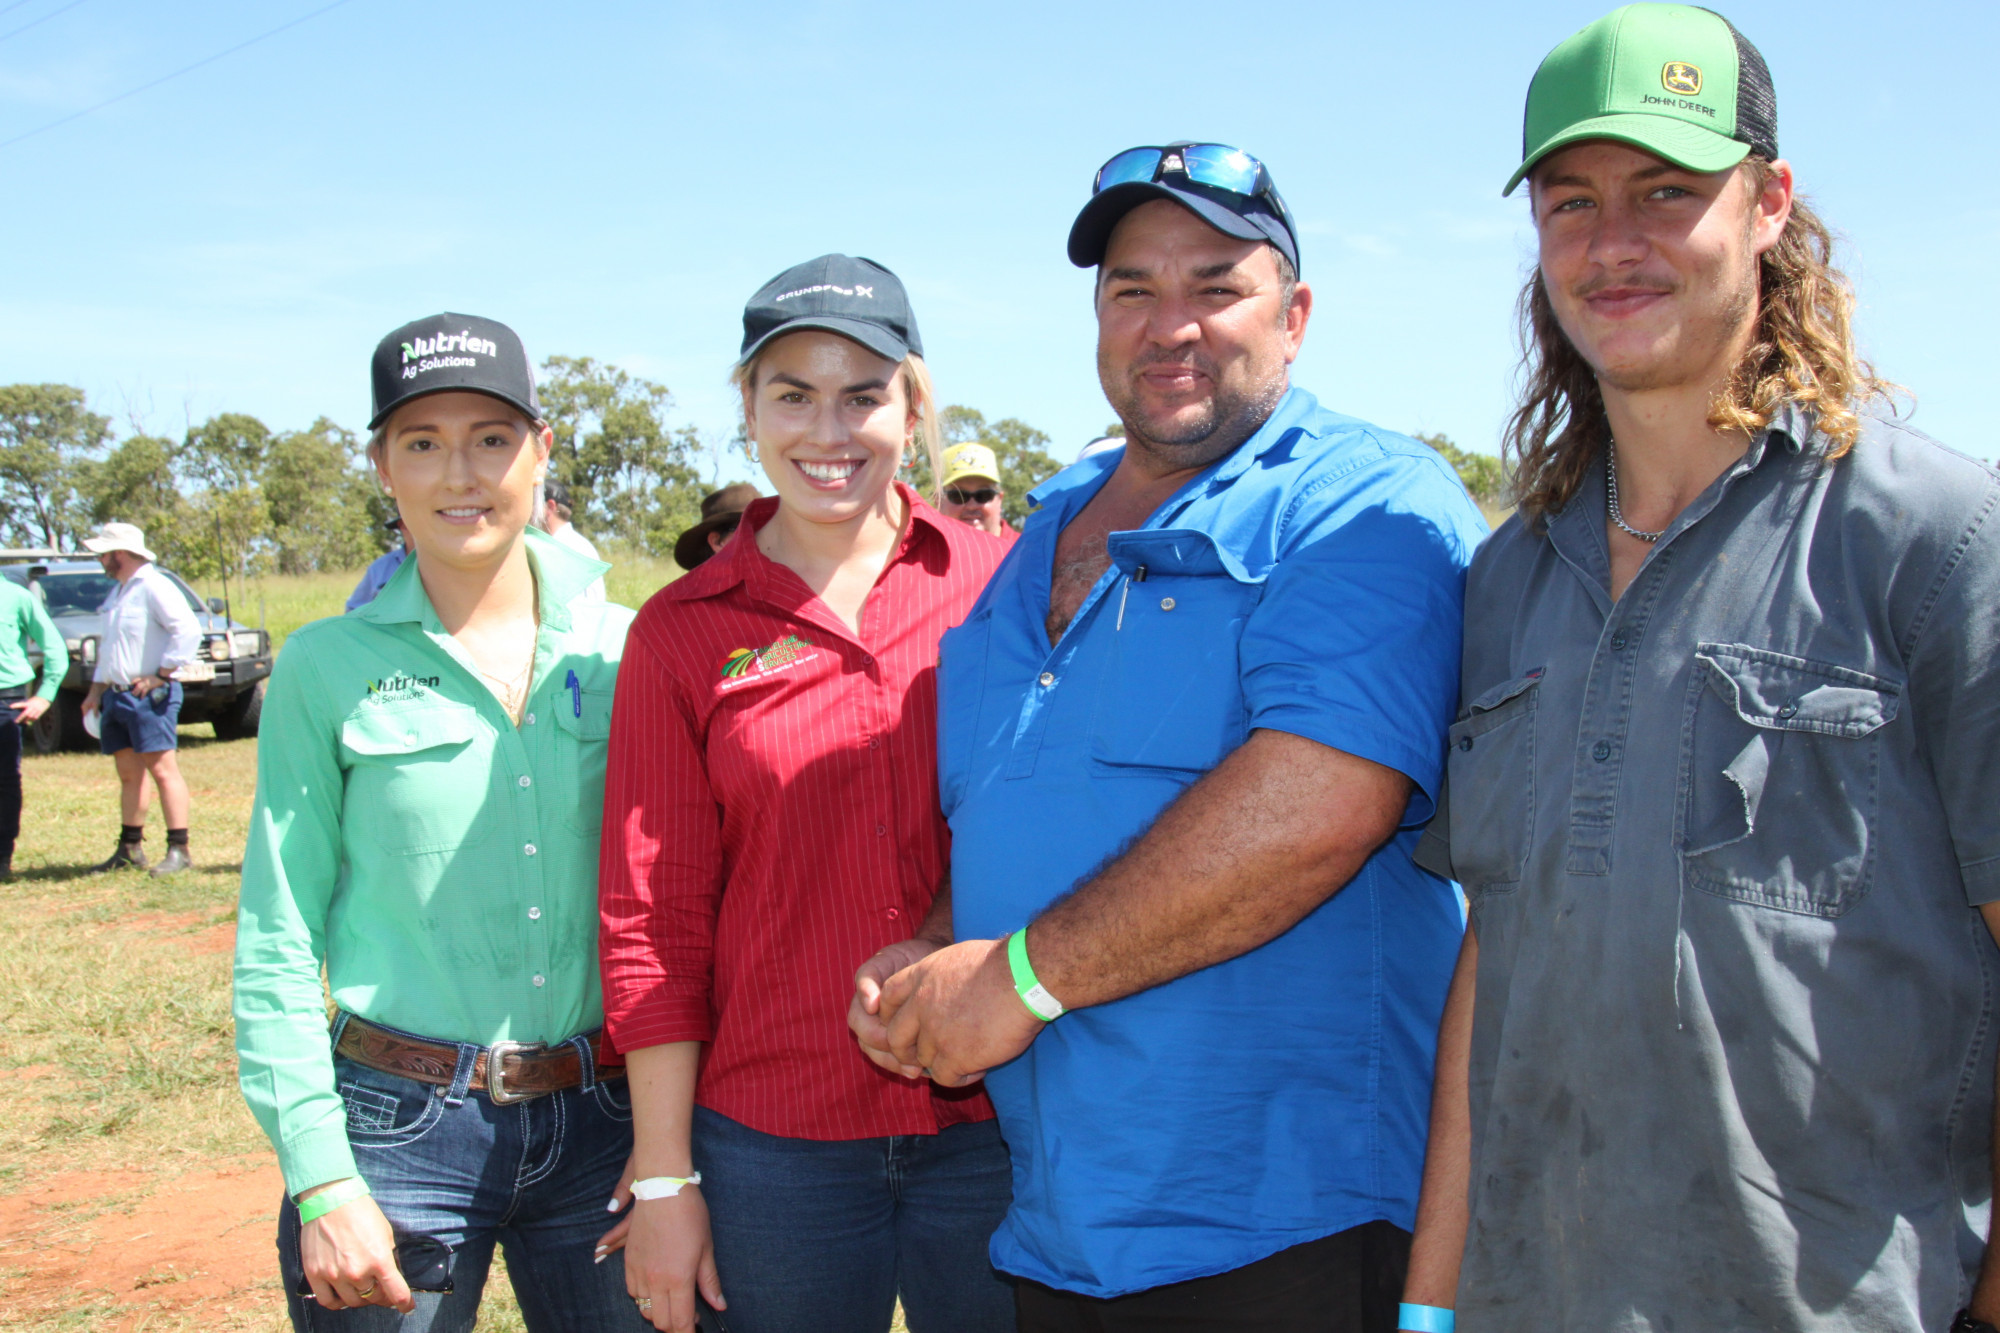 SUCCESS: Nutrien Ag's Account Manager - Merchandise, Lucy Pedersen with local agronomist, Olivia Pezzelato, maize farmer Roger Pezzelato and Kaban cotton grower, Clayton Dalgety were interested to see the cotton growing at Redbend Farming, Hot Springs.